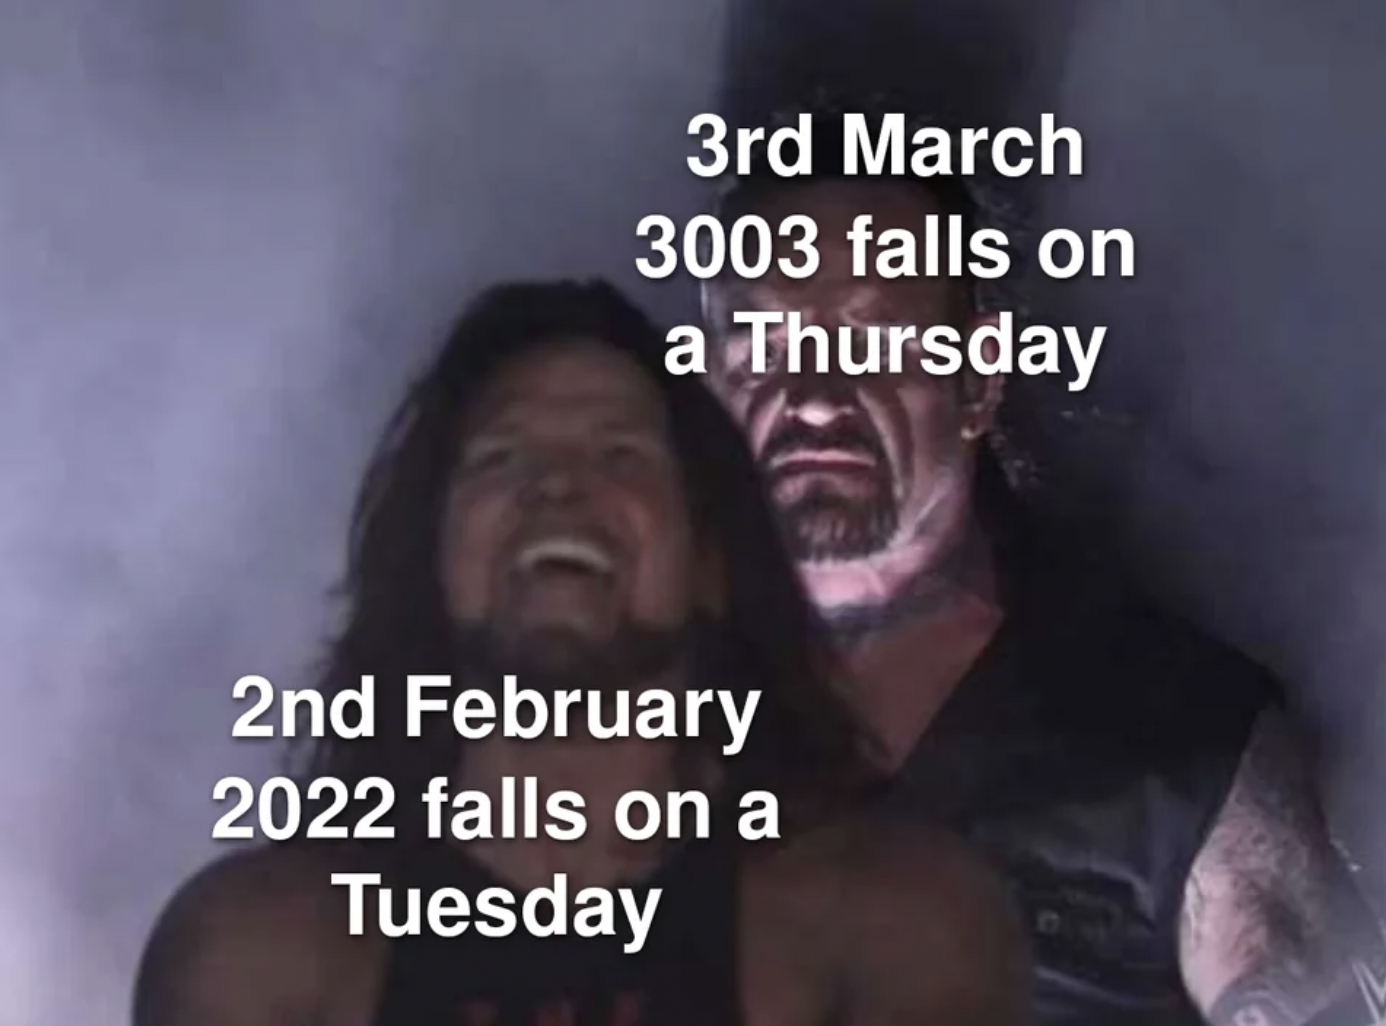 23 Thursday Memes In Honor of Tomorrow Being Friday